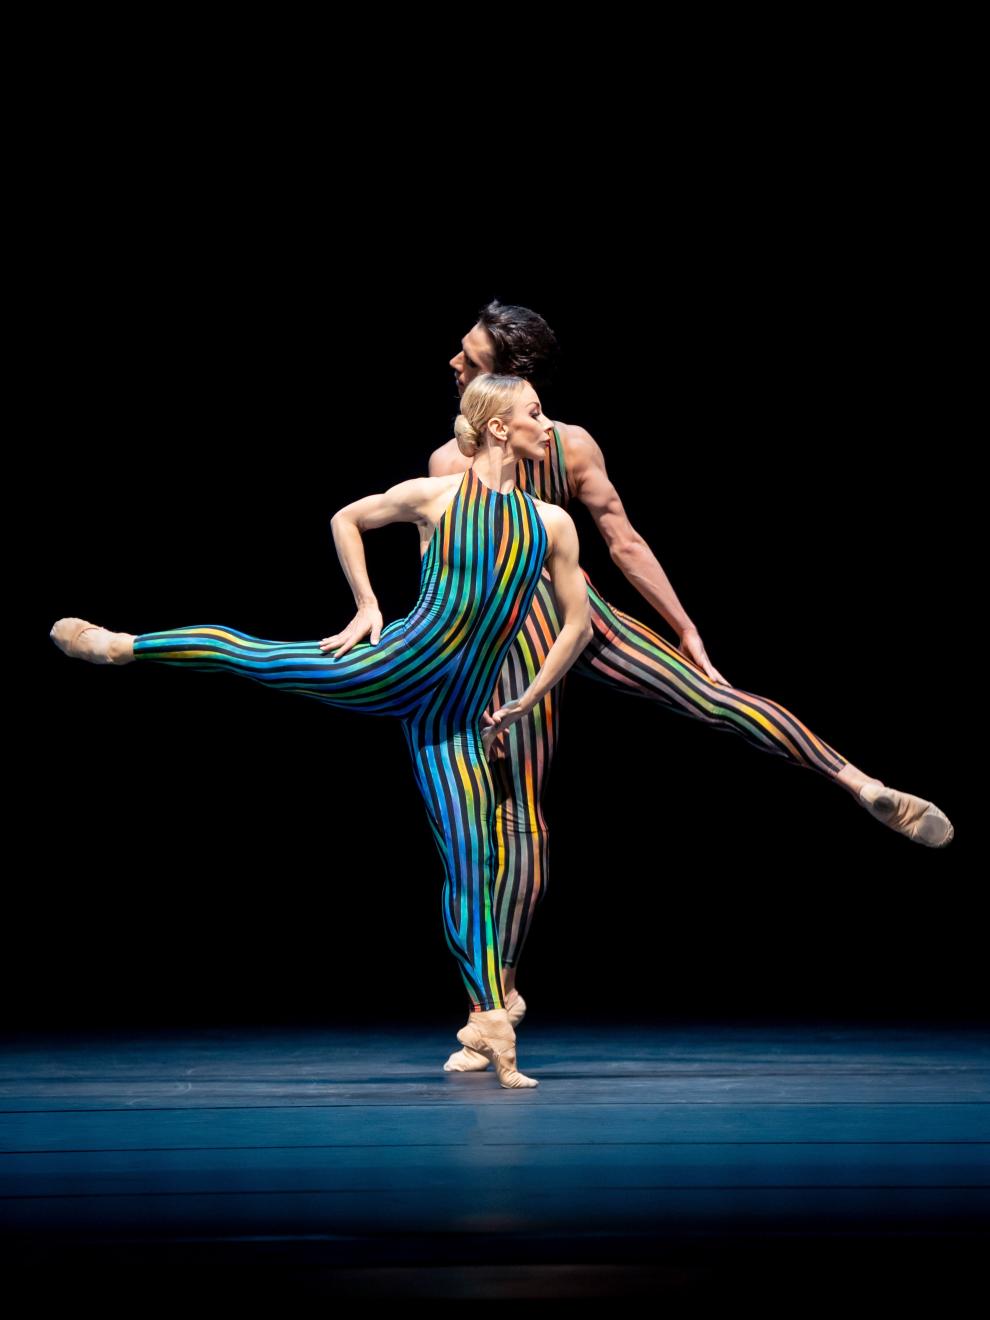 4. A.Liashenko and G.Wielick, “Concertante” by H.van Manen, Vienna State Ballet 2023 © Vienna State Ballet/A.Taylor